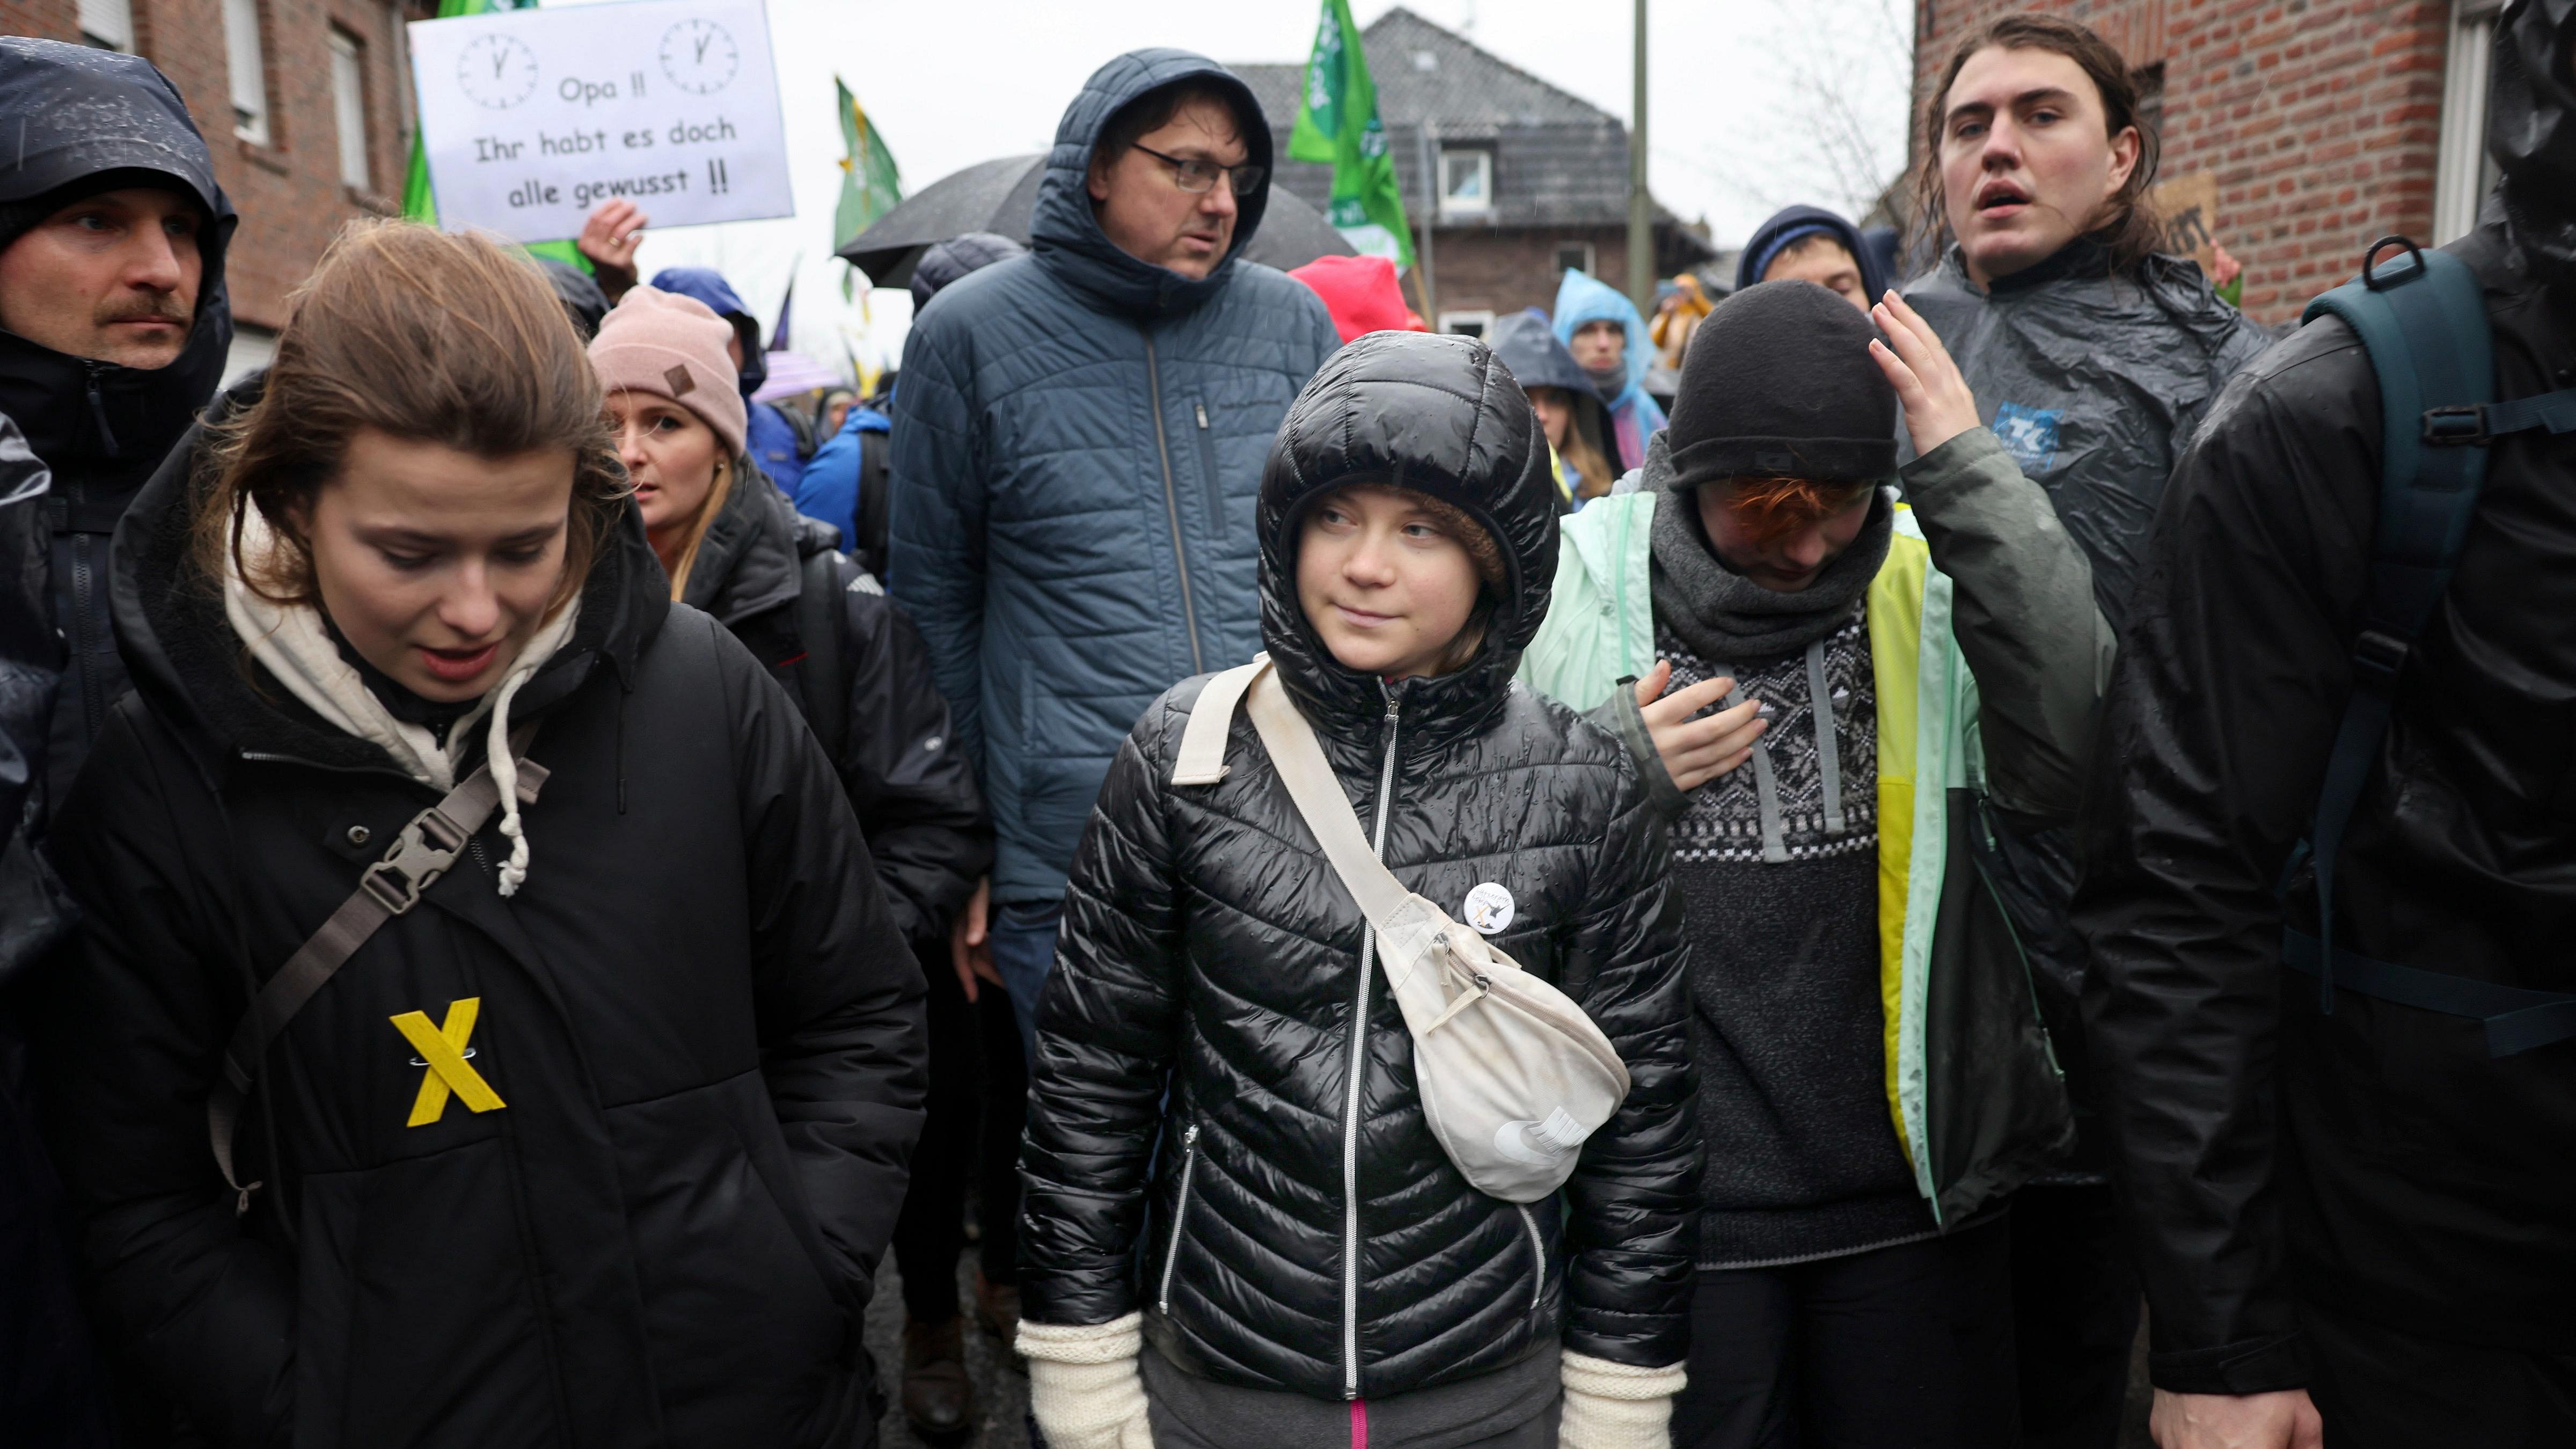 Climate activists Luisa Neubauer, left, and Greta Thunberg, center, march together during a protest. Credit: AP Photo